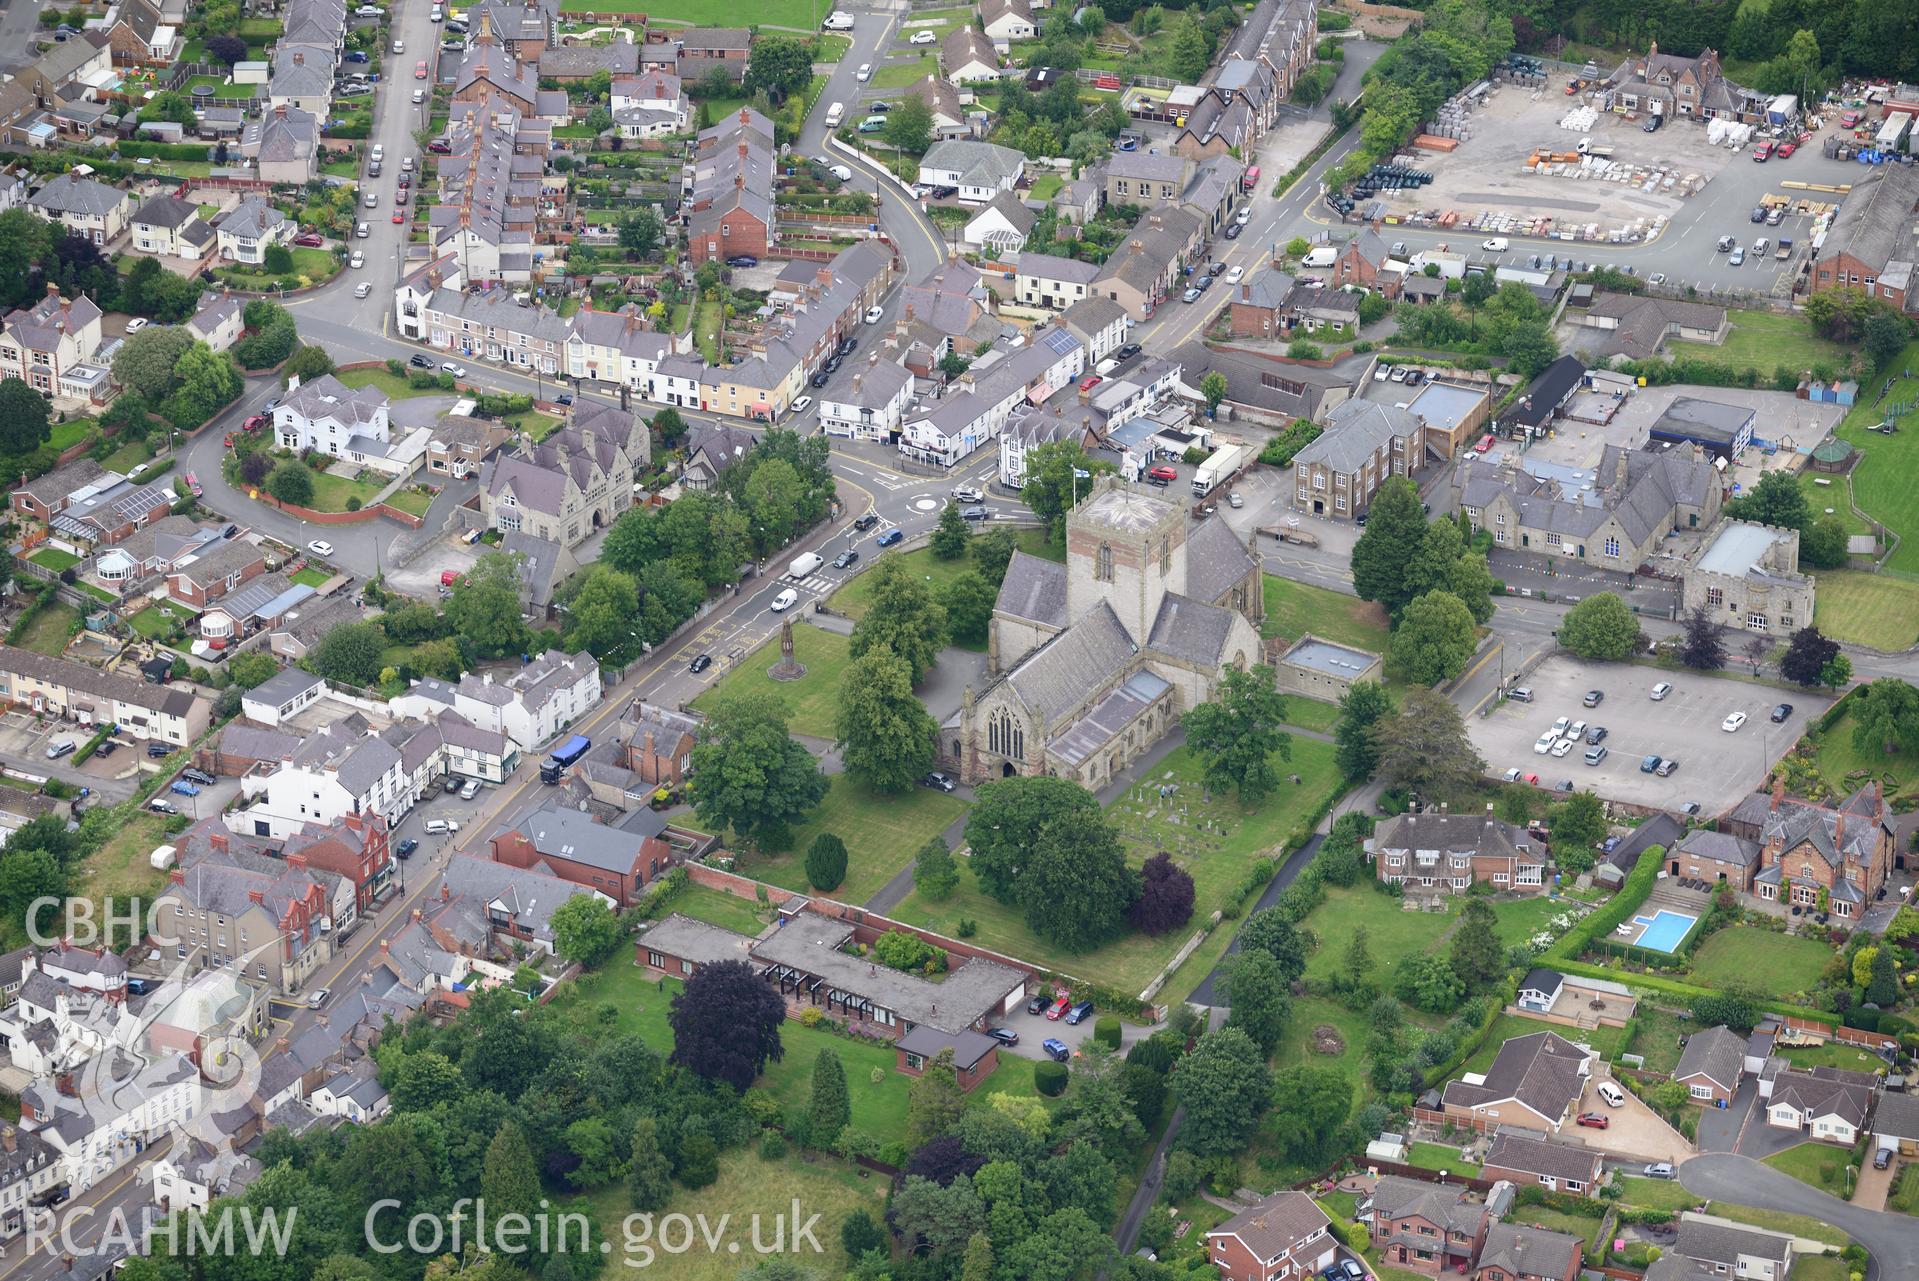 St. Asaph Cathedral, William Morgan Memorial, railway station, national school, Pendinas & Kentigern Hall. Oblique aerial photograph taken during the Royal Commission's programme of archaeological aerial reconnaissance by Toby Driver on 30th July 2015.